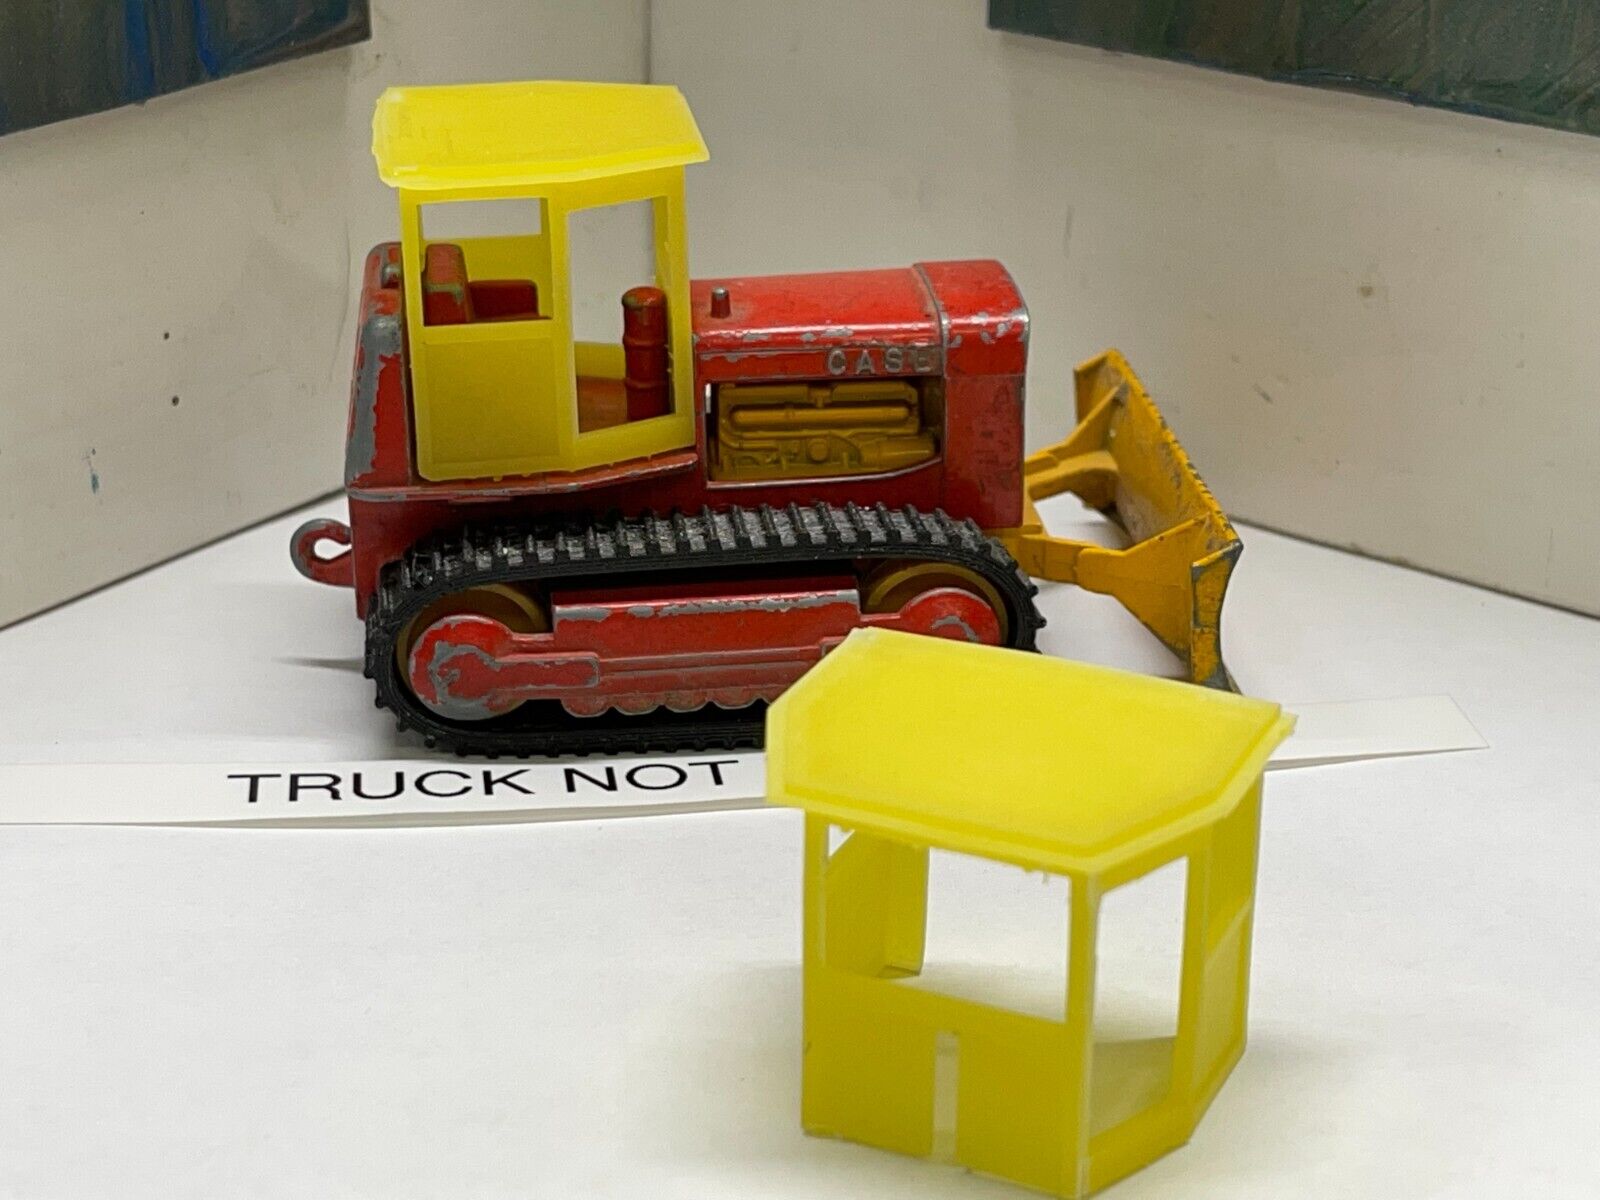 VINTAGE MATCHBOX, LESNEY KING SIZE CASE TRACTOR, No 17 (CAB ONLY)